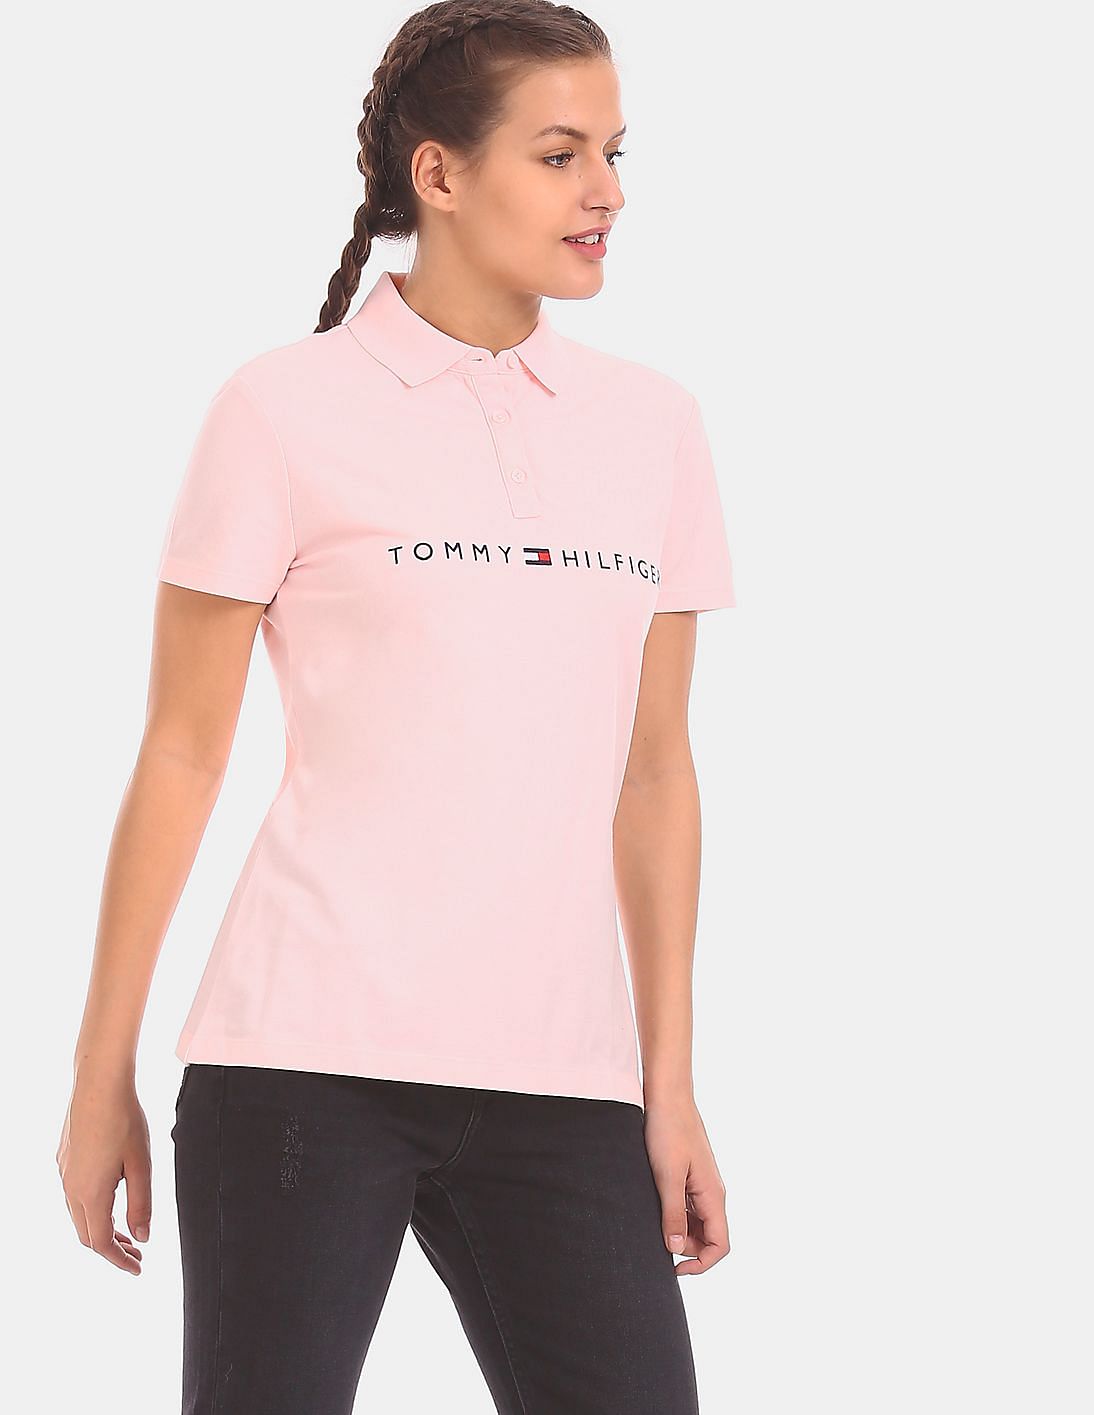 polo tommy hilfiger rosa